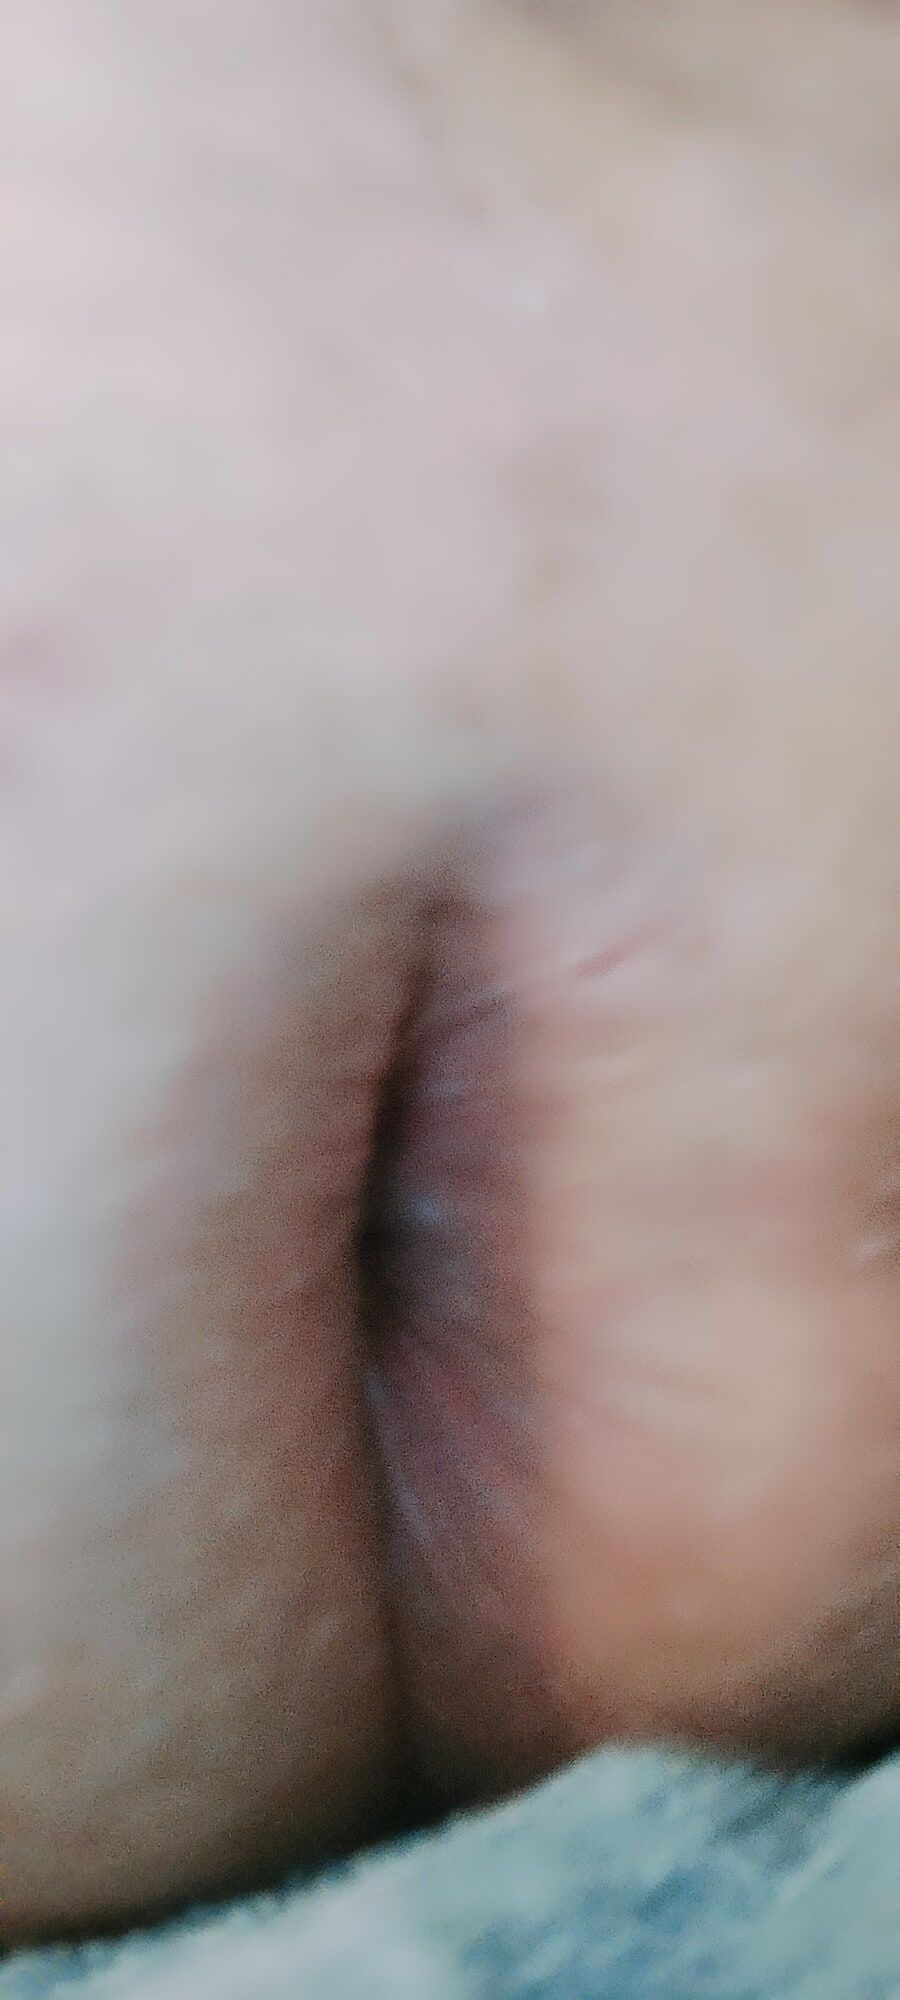 Random pics of my cock and asshole  #13